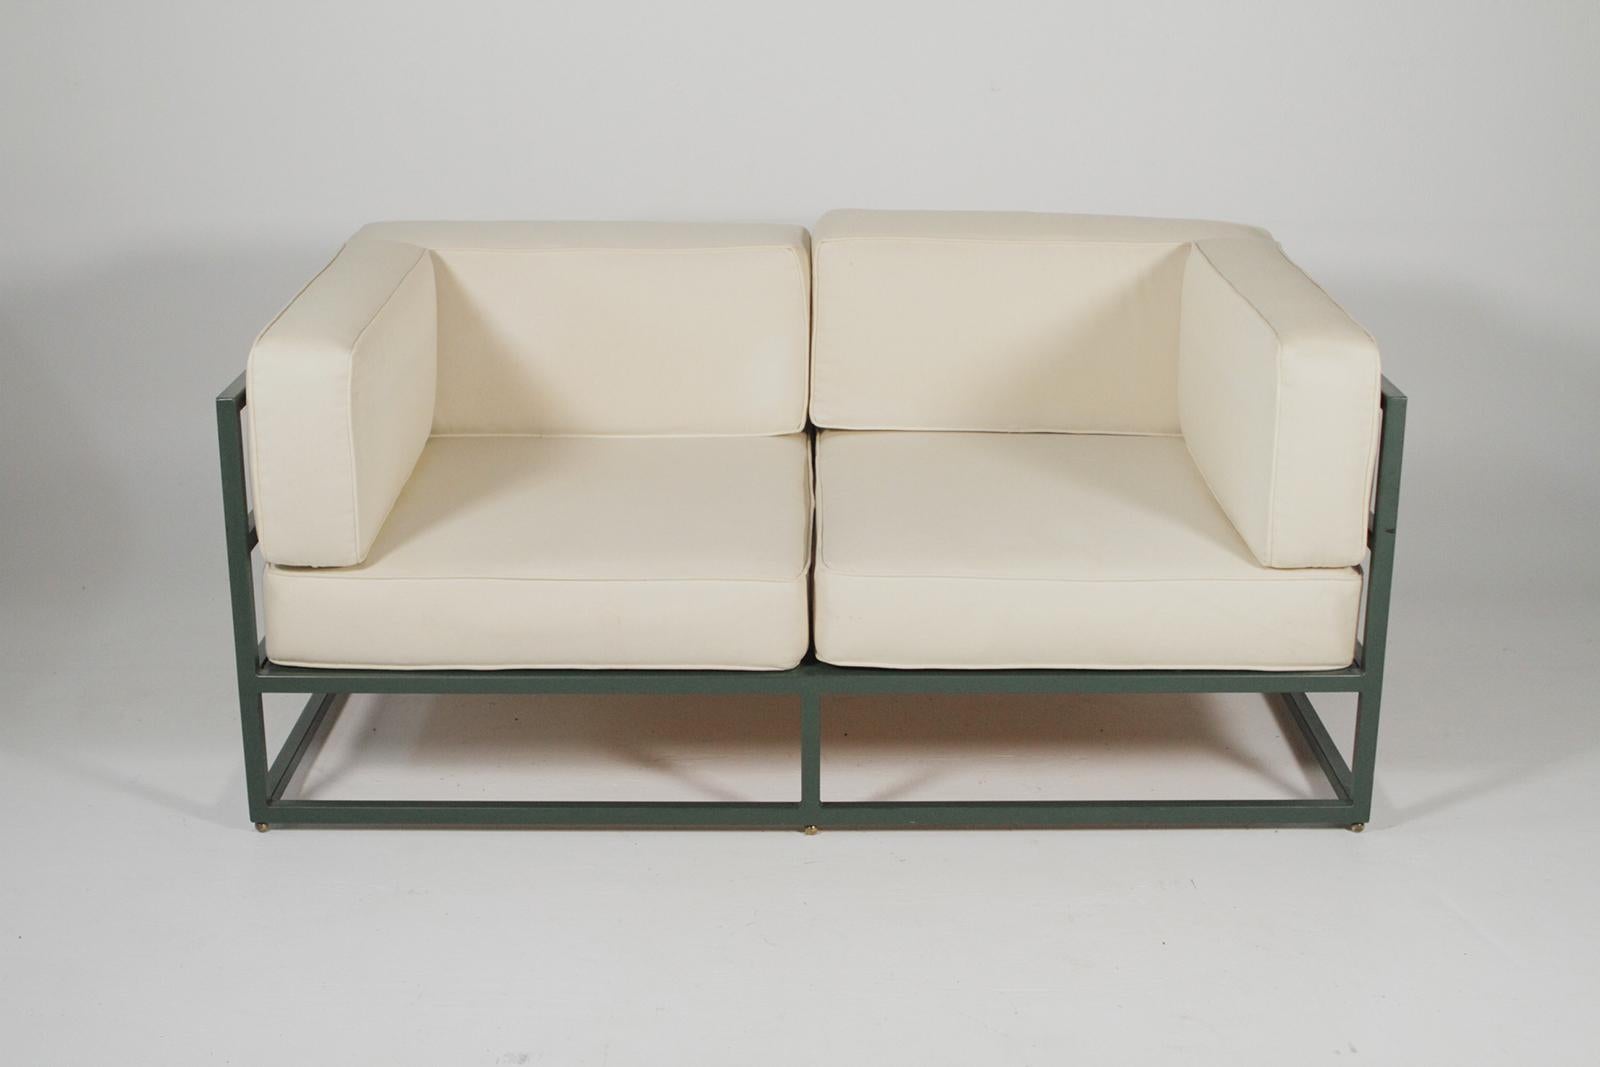 Hugh Newell Jacobsen custom-made love seats with original green enameled steel frames, cushions could use a cleaning or new upholstery. These were a custom order in 1987 and there’s a sketch from Newell himself and signed. This is one of the